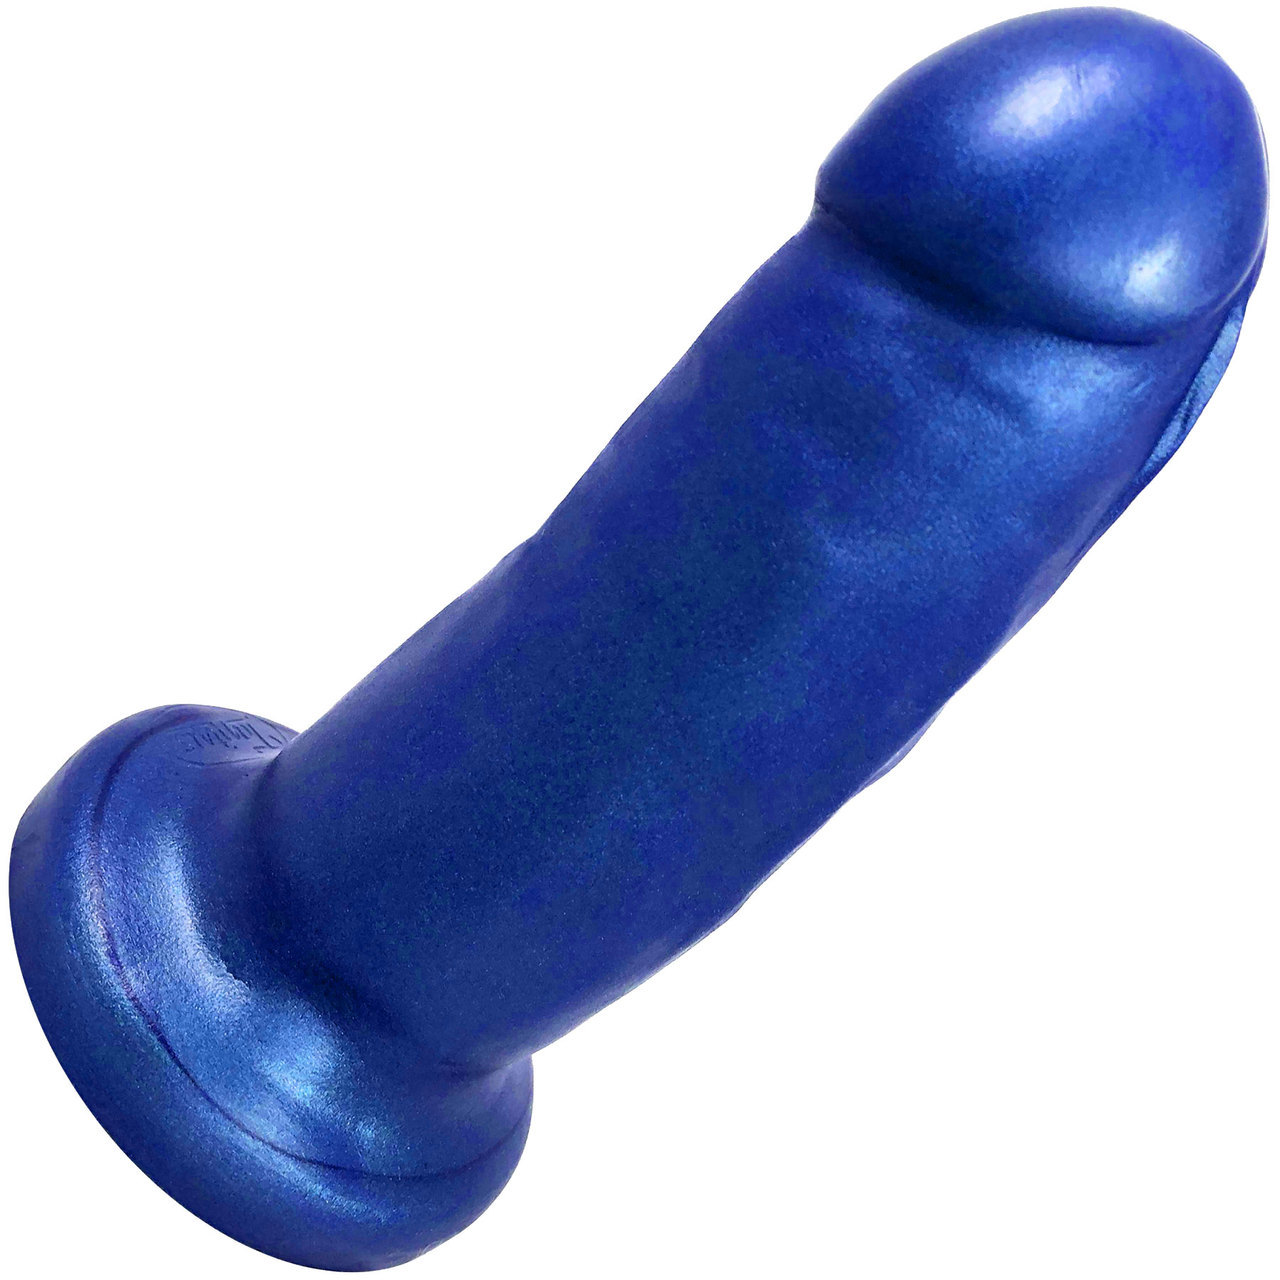 Chubby Super Soft Silicone Dildo By Tantus AKA They/Them